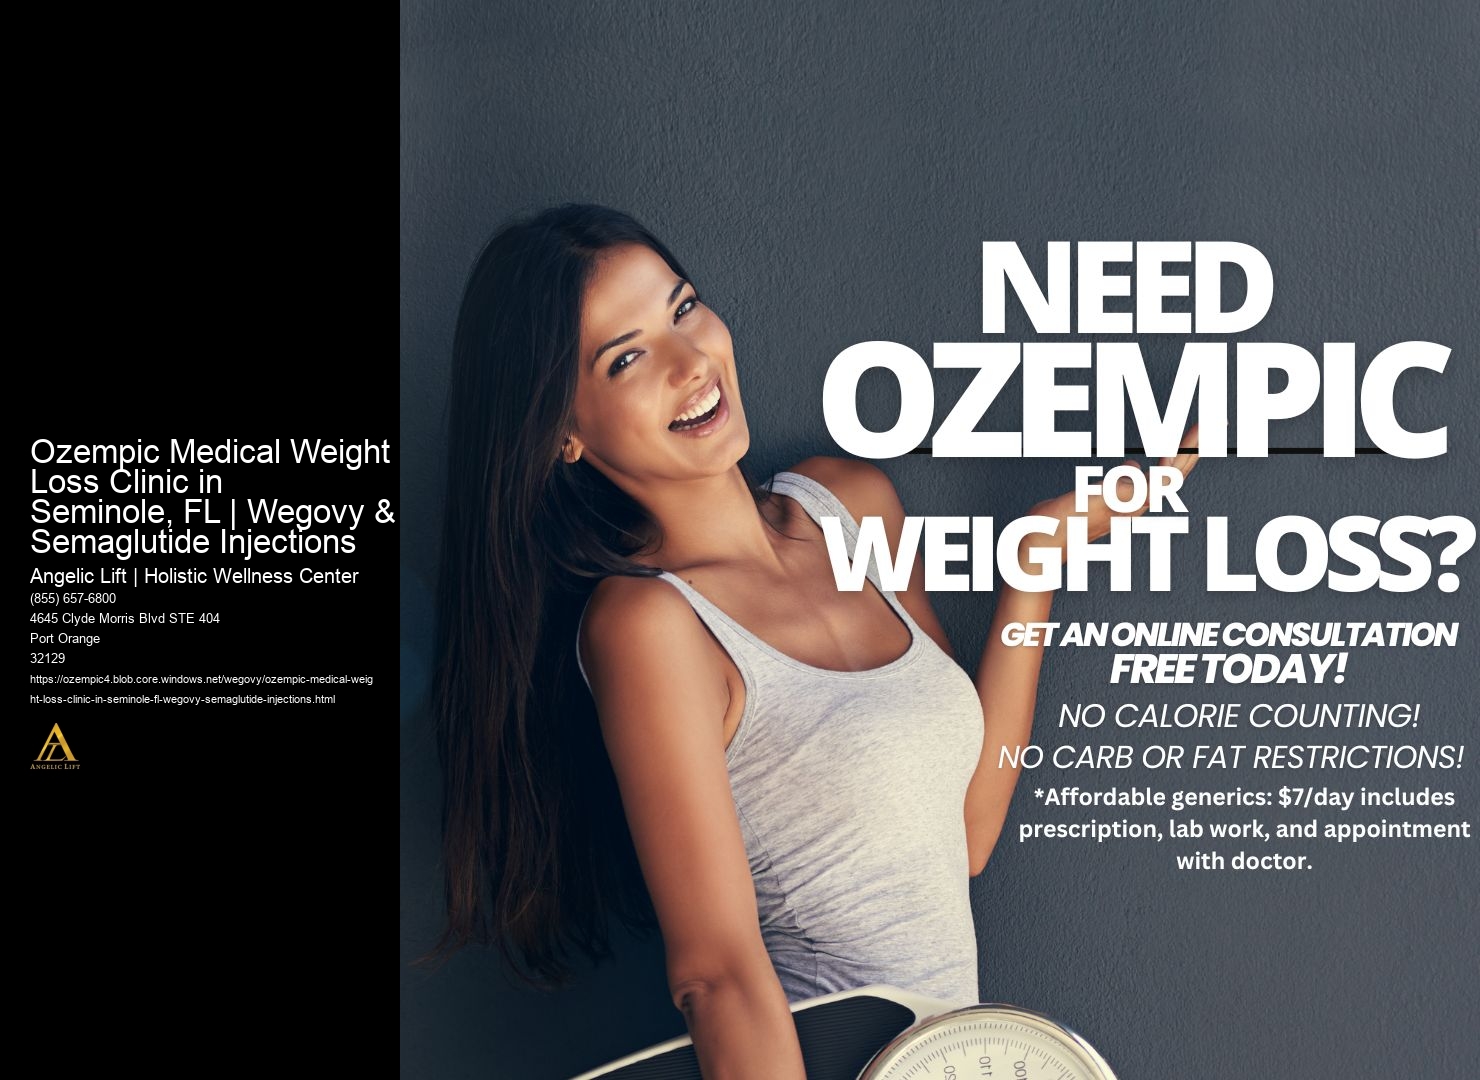 Ozempic Medical Weight Loss Clinic in Seminole, FL | Wegovy & Semaglutide Injections